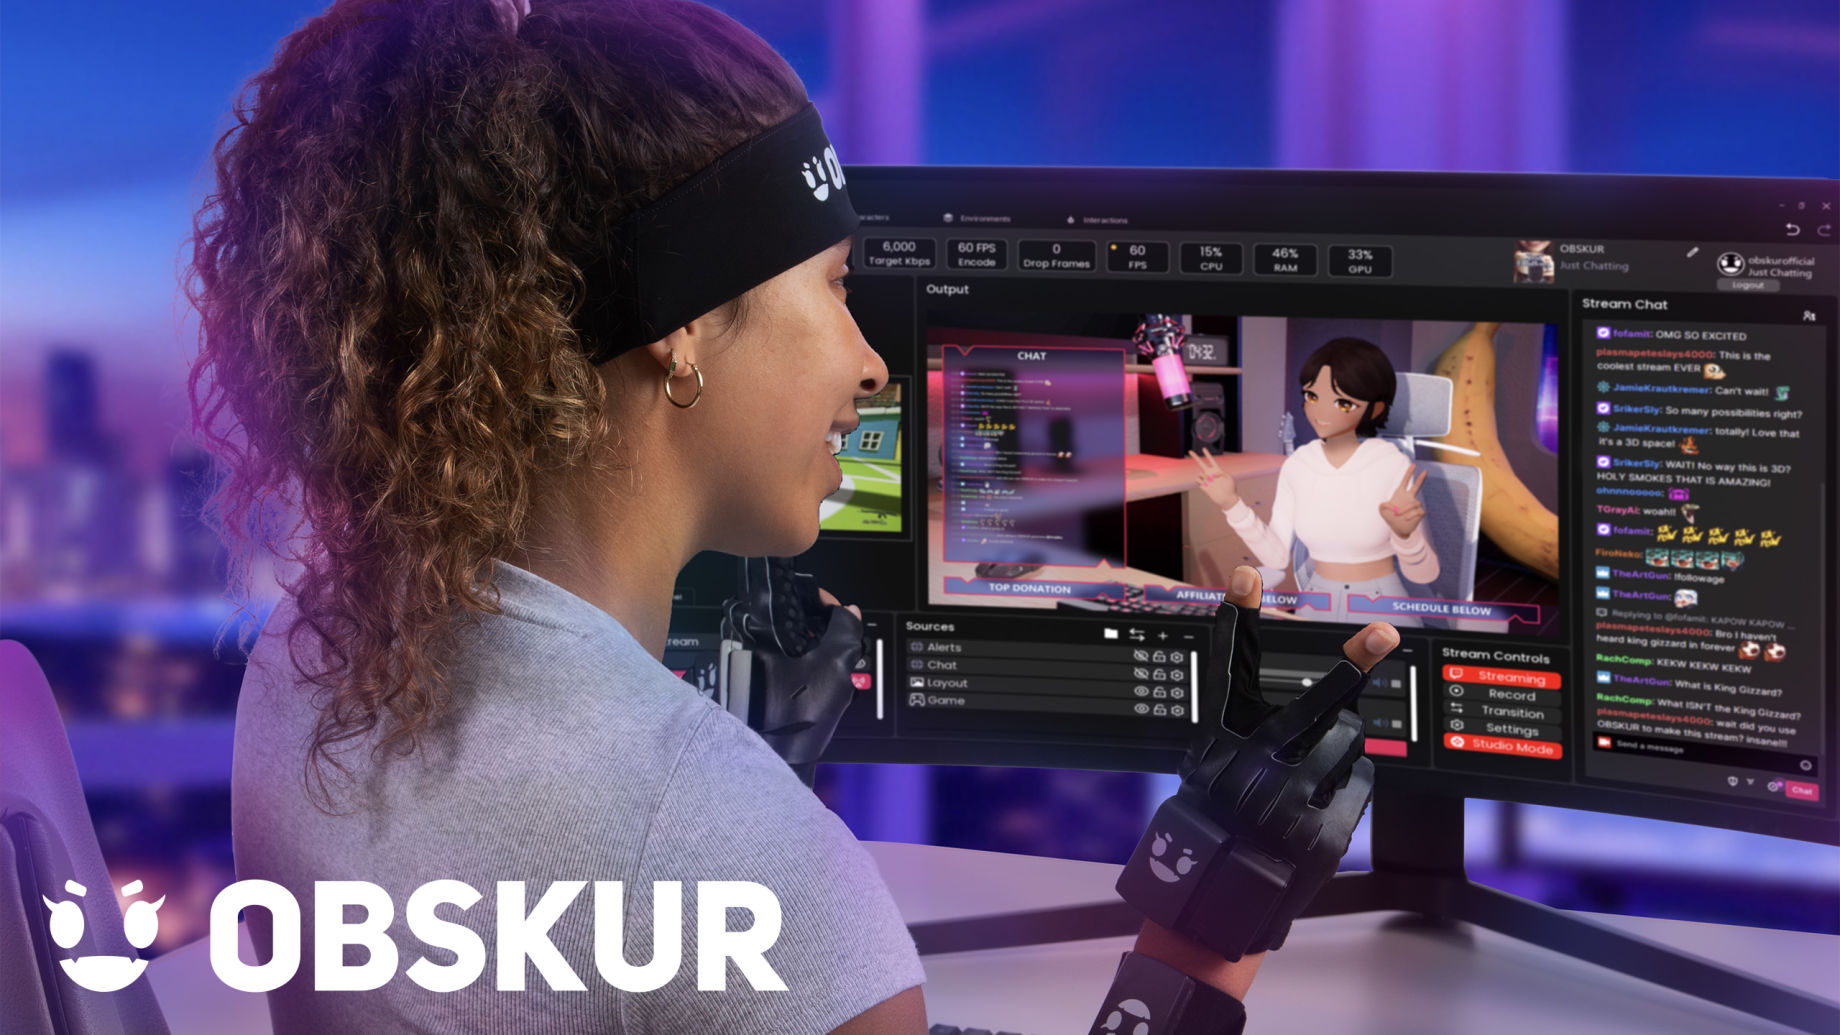 Obskur's Character Creator and marketplace streamlines VTubing